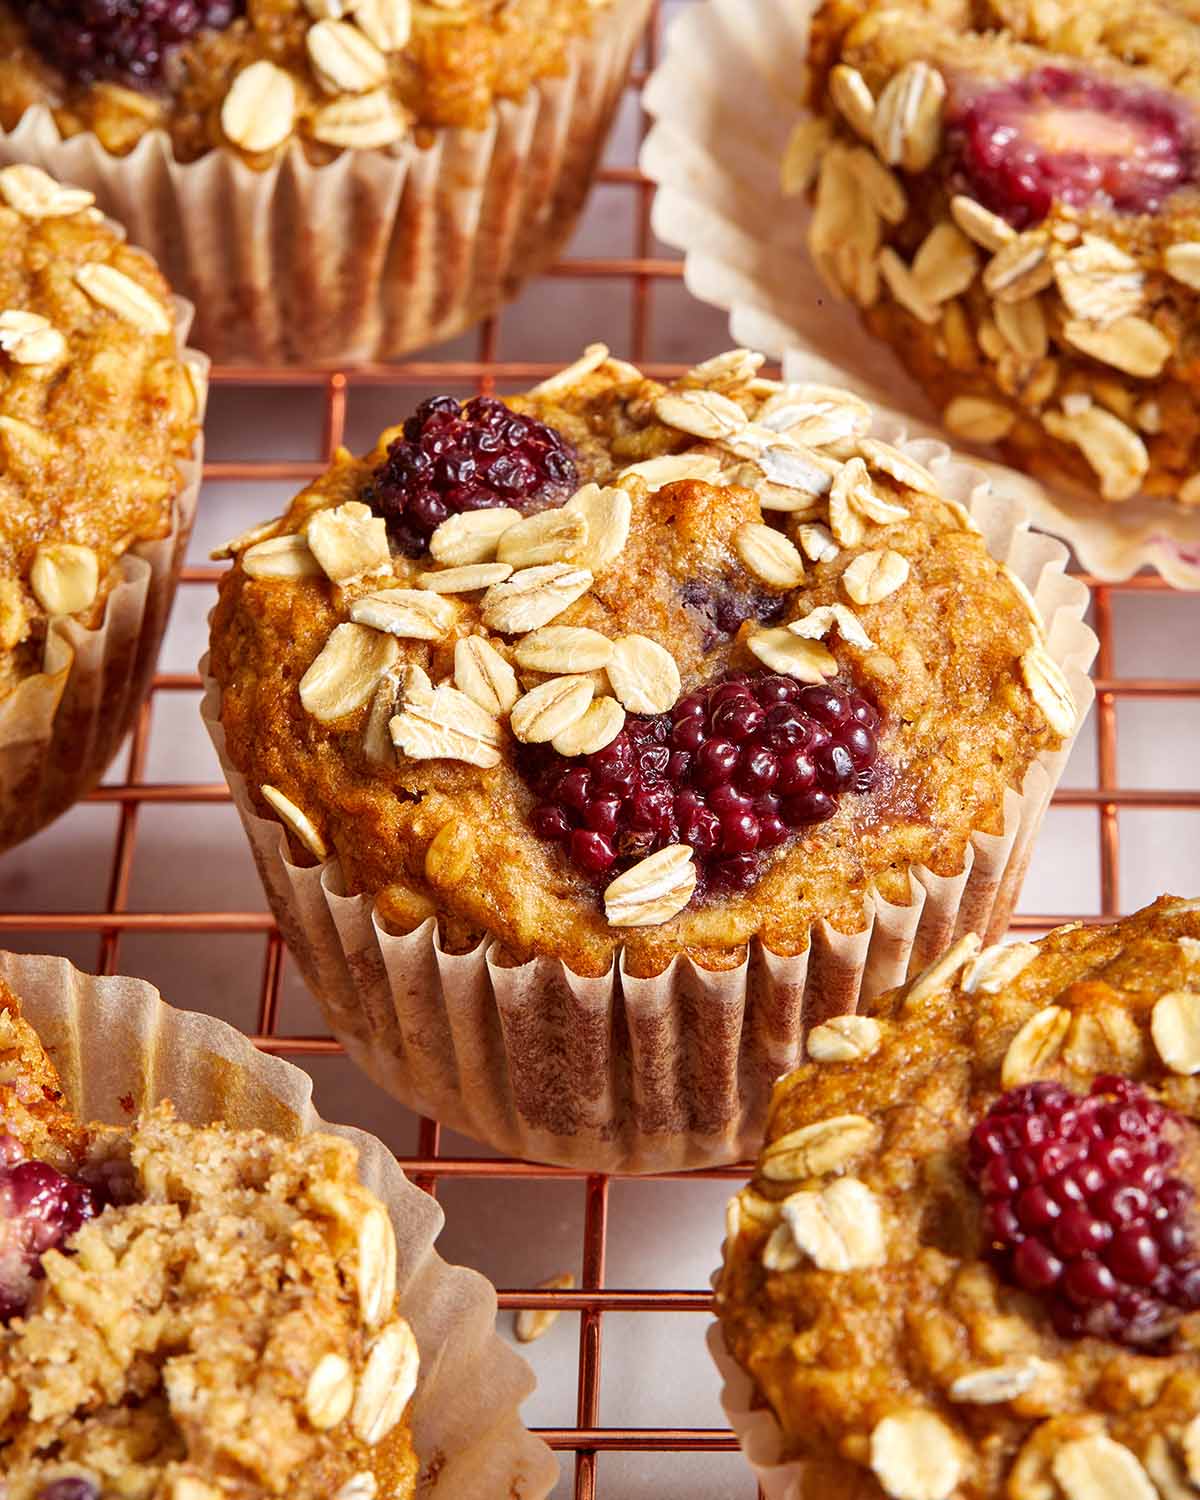 Close up view of a banana blackberry oatmeal muffin on a wire rack.